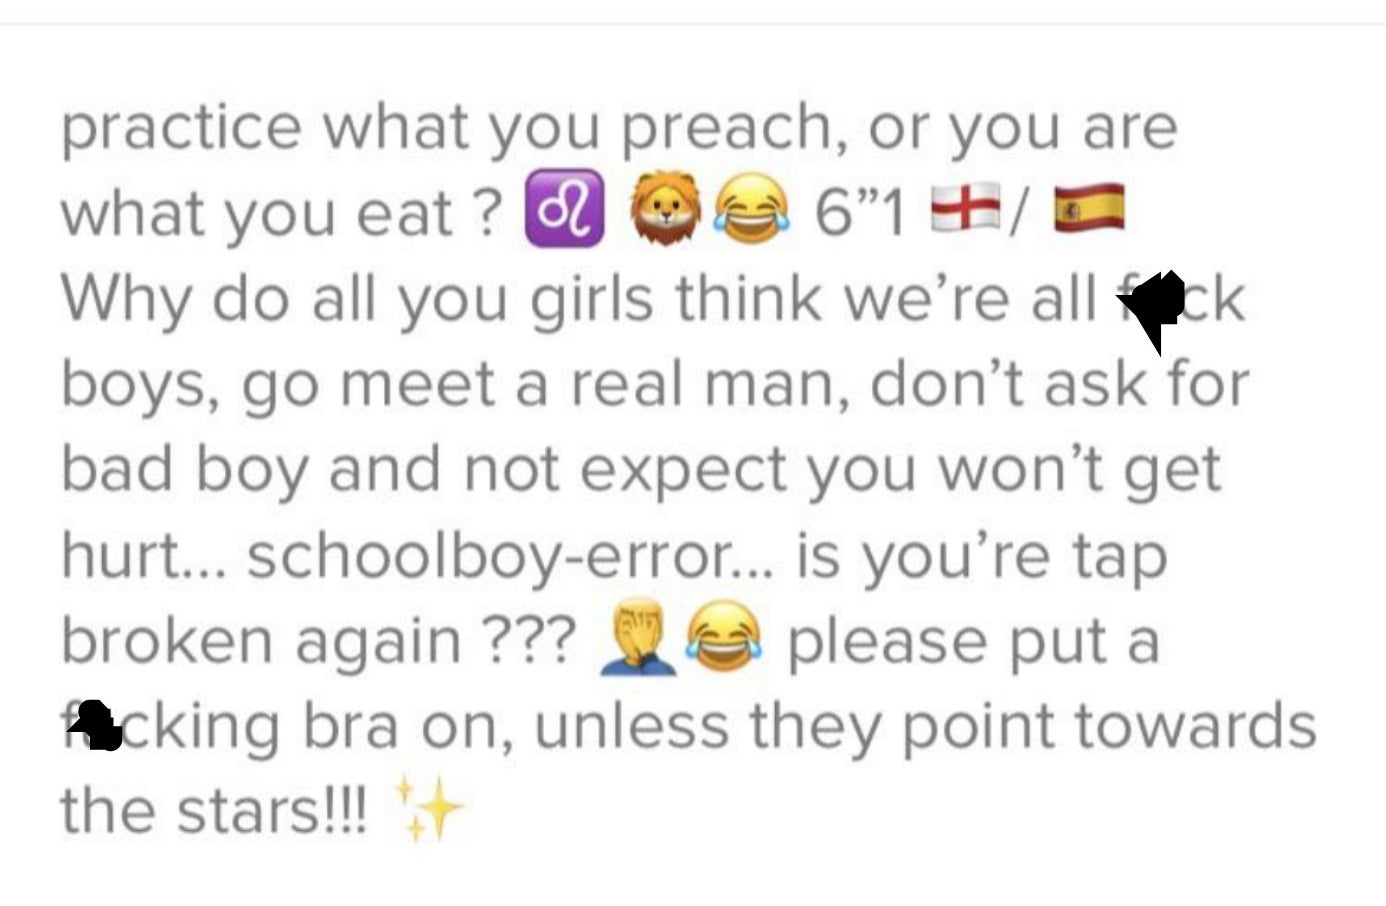 man going off that all girls think men are fuck boys and then says that says that girls should put their bra on unless they point to the stars